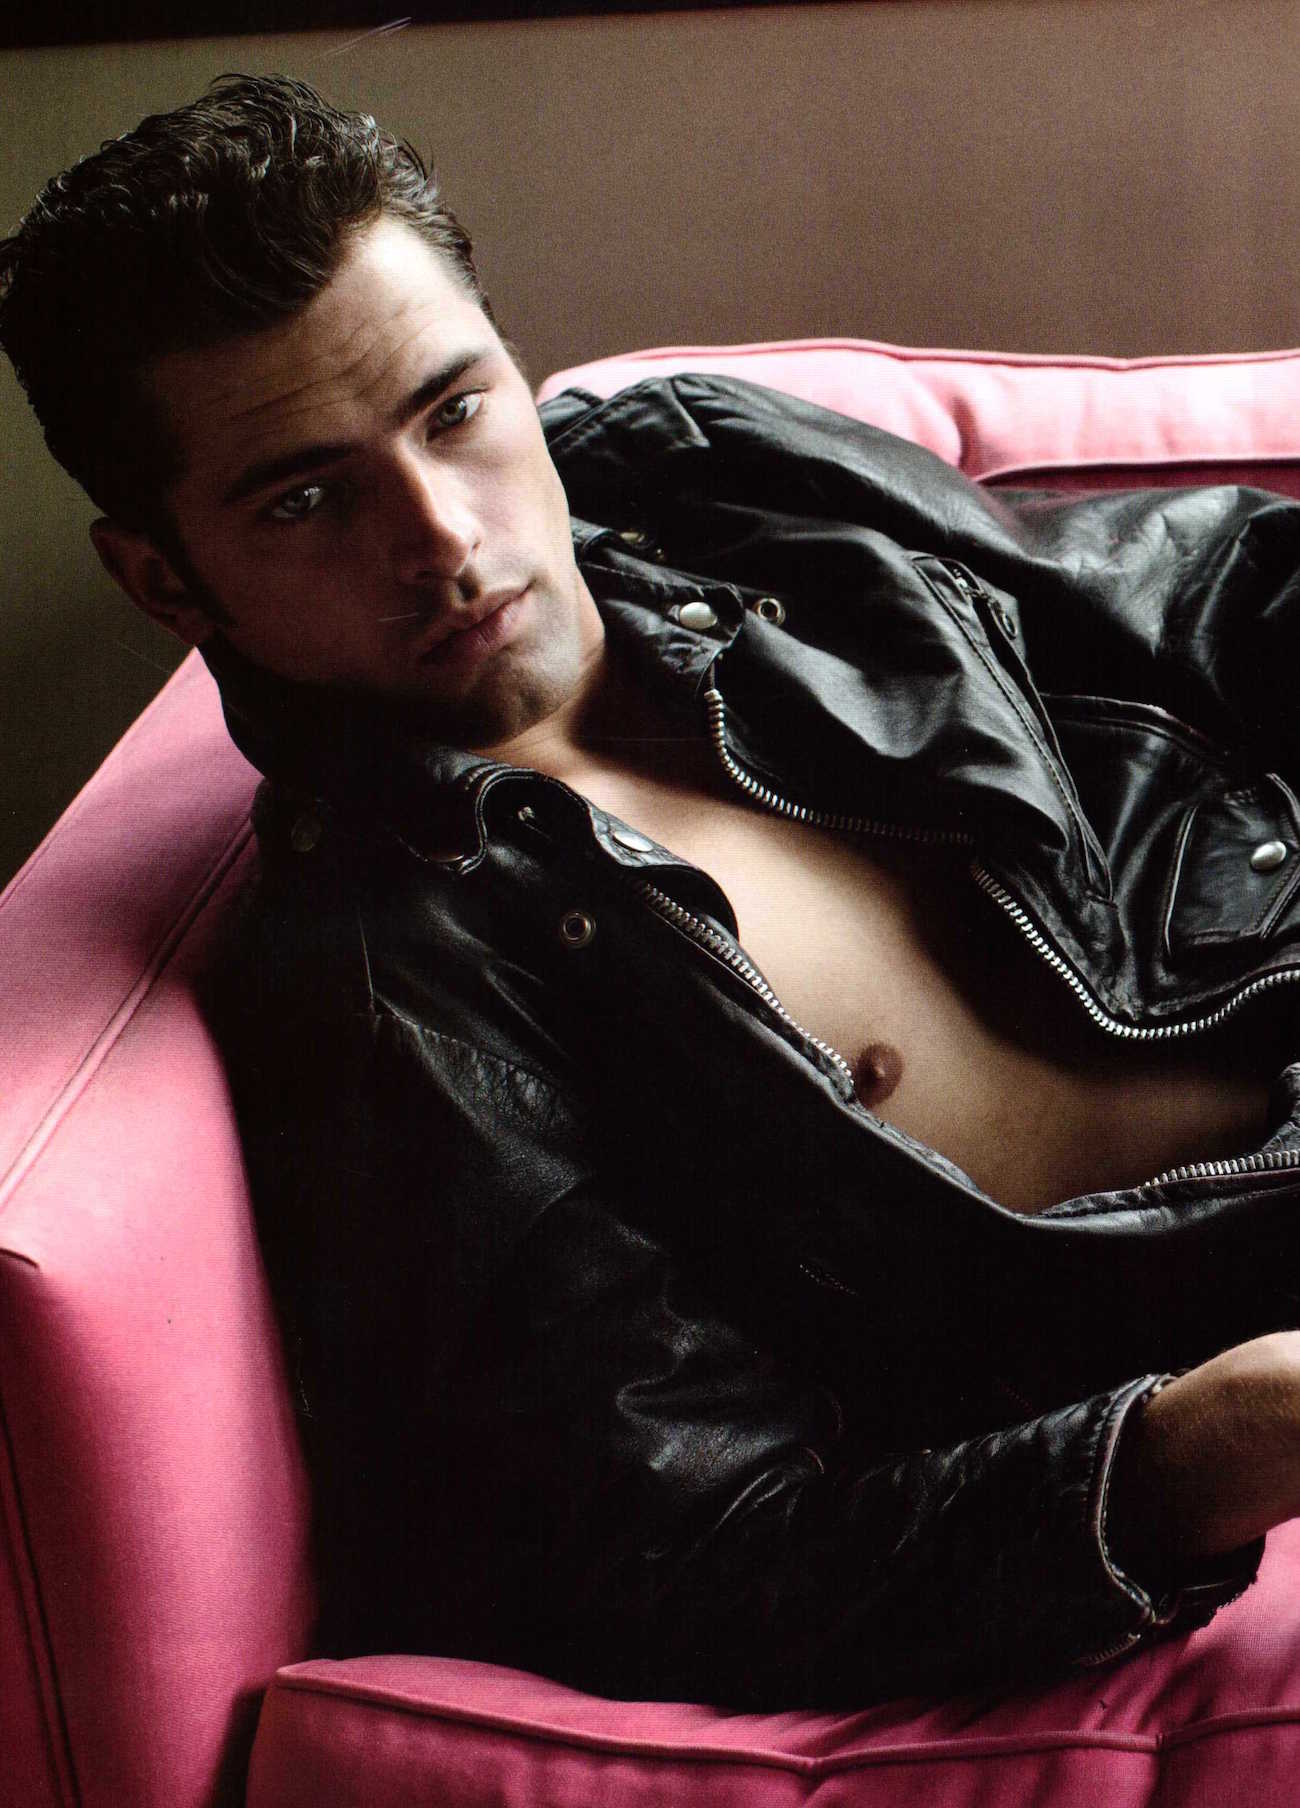 sean-opry-dsection-ss15-cover-story-015.jpg